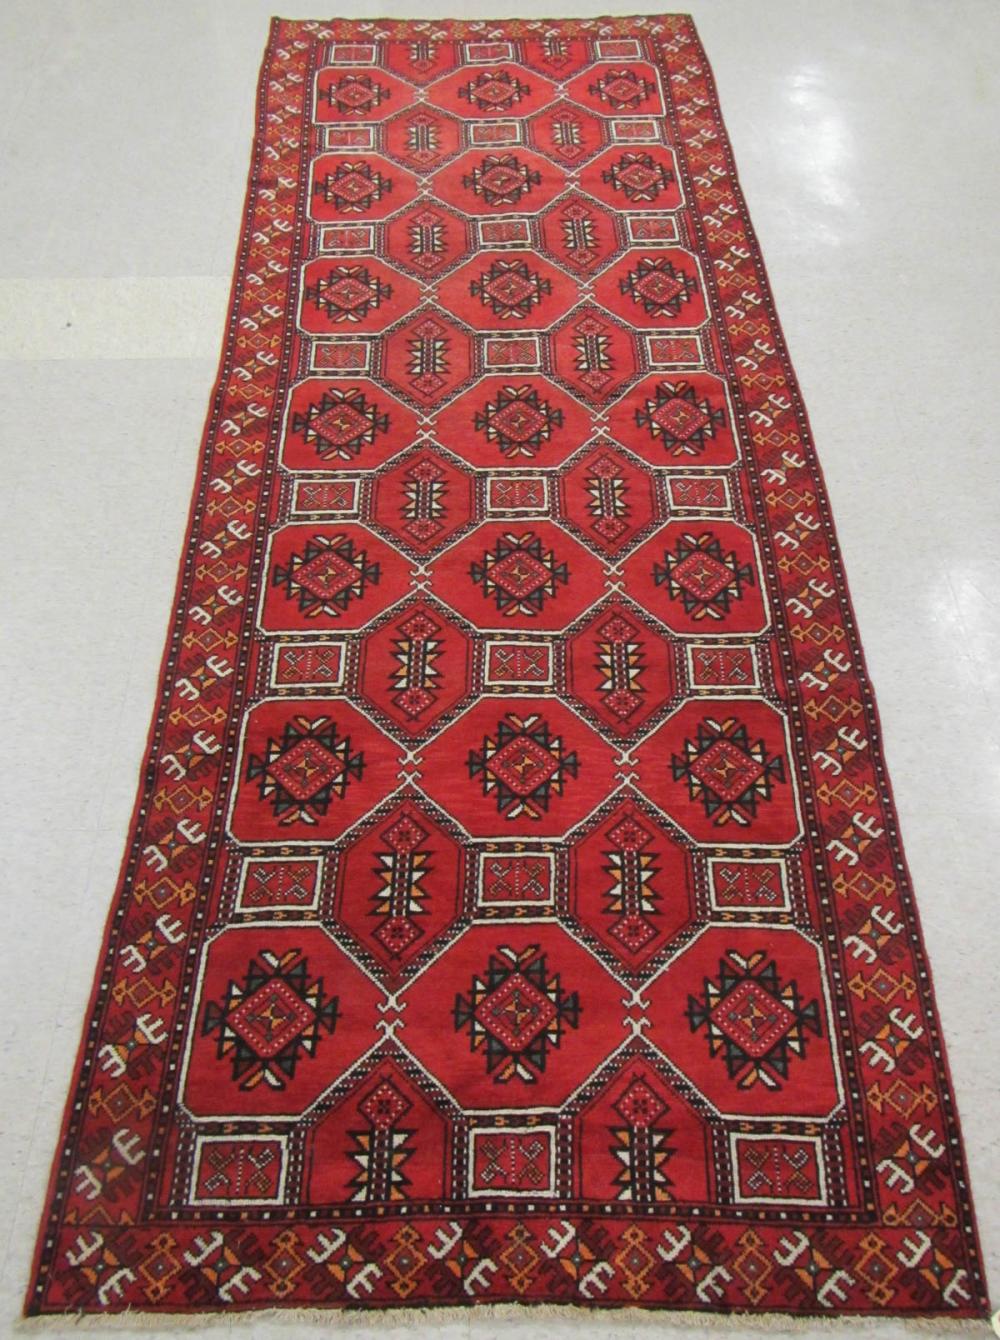 PERSIAN TURKMAN RUG HAND KNOTTED 315b77